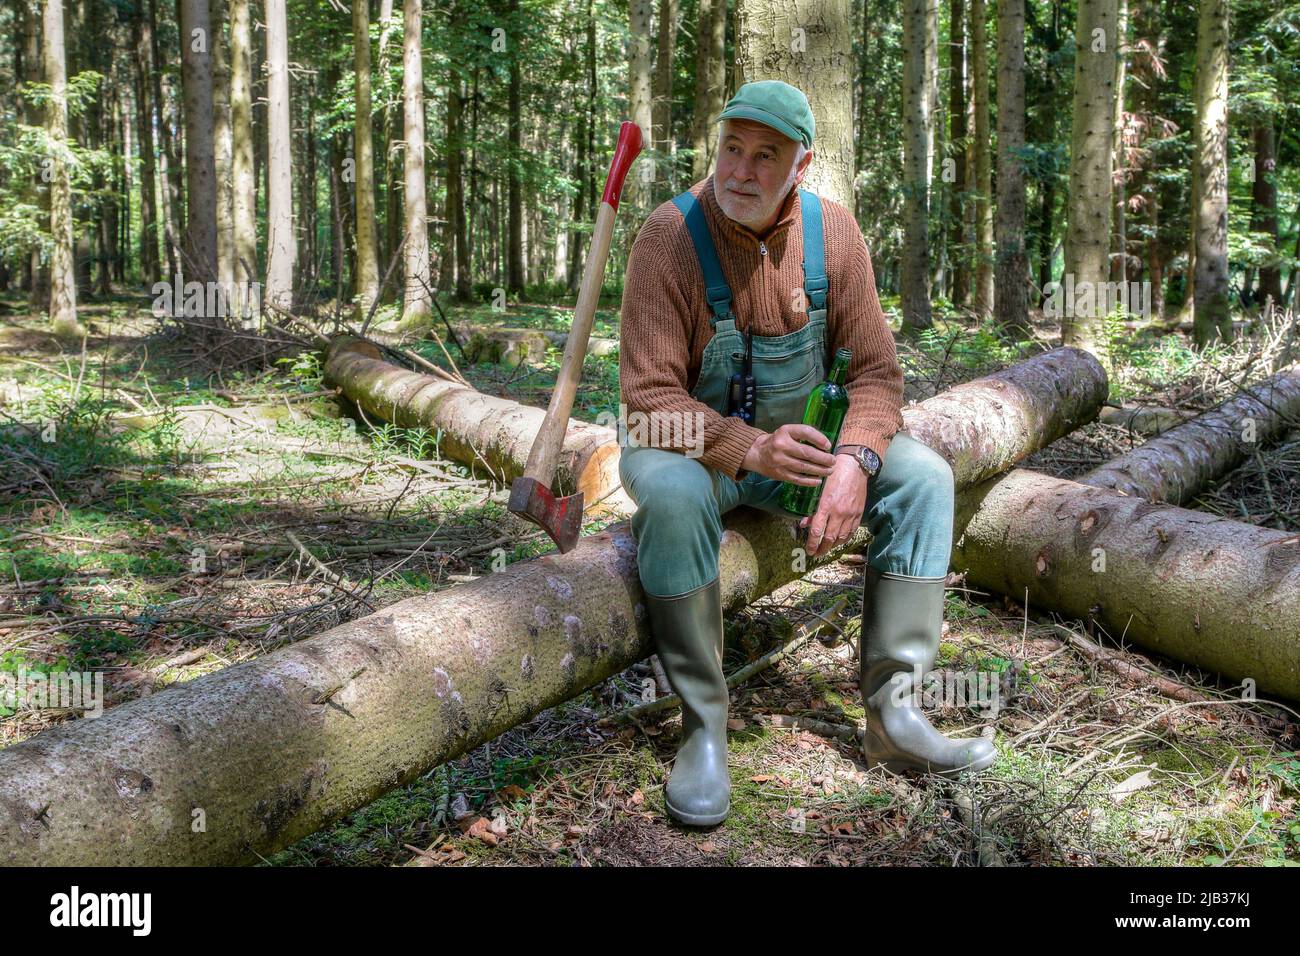 A lumberjack sits contentedly on a log in the forest next to his ax and takes a break from work.He enjoys the silence and tranquility in the forest. Stock Photo